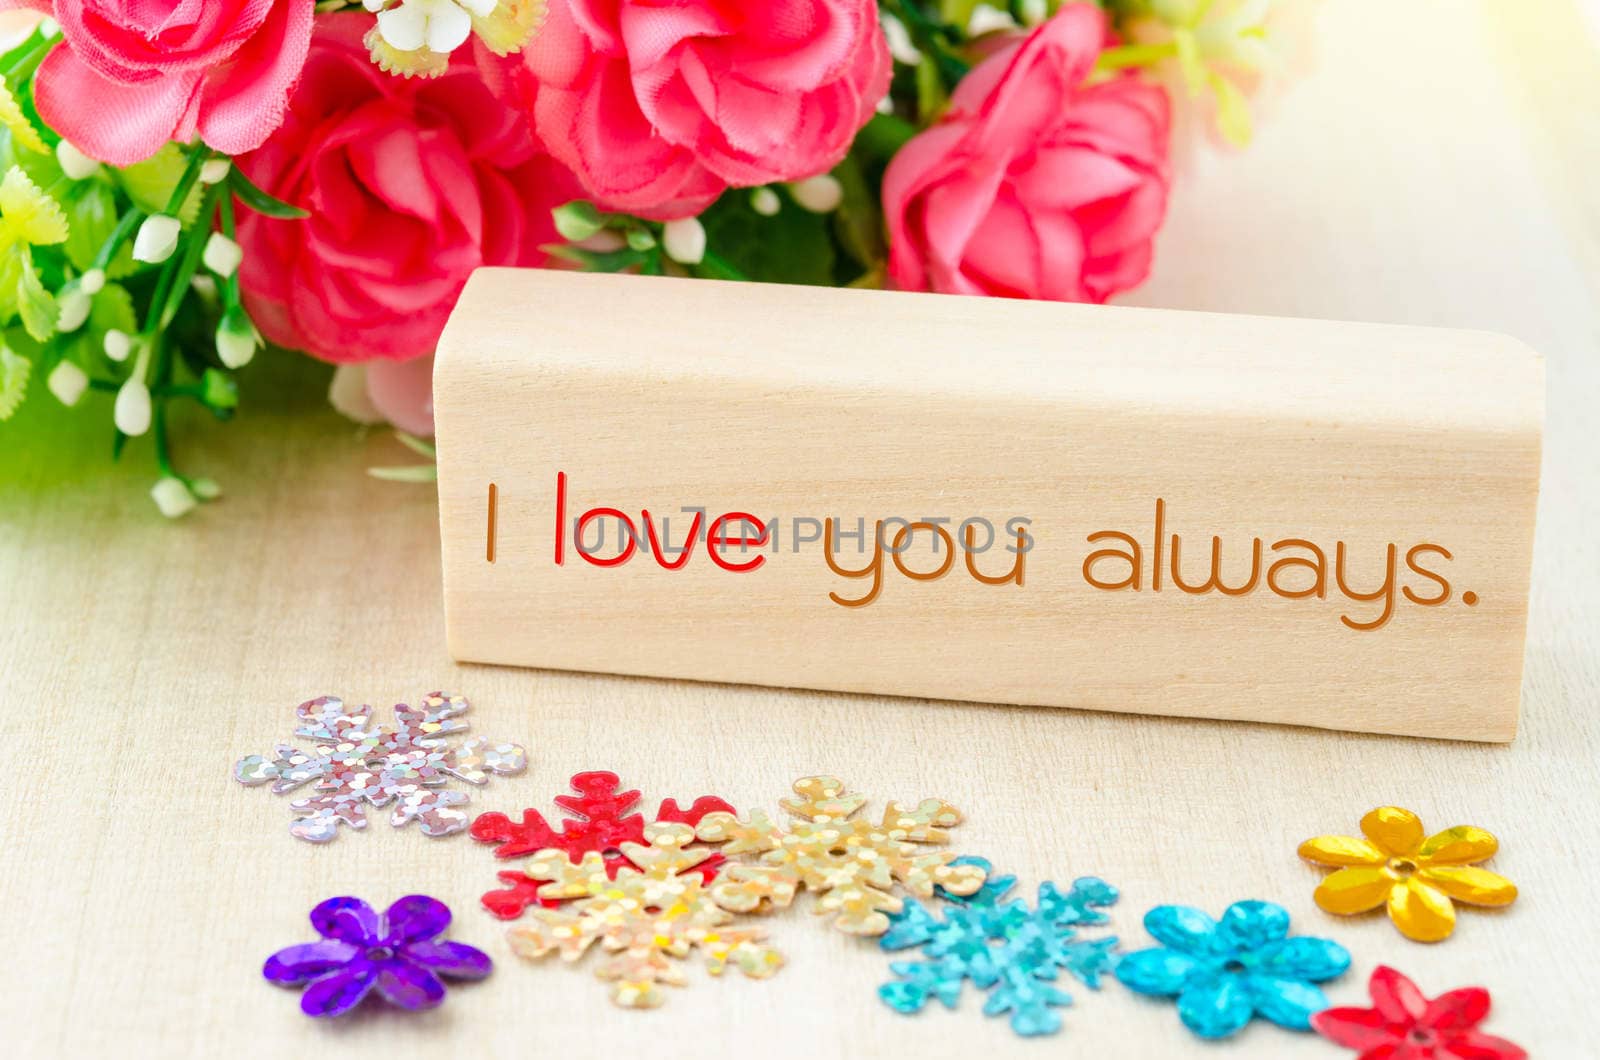 I love you always On wooden tag and ping rose on wooden background.